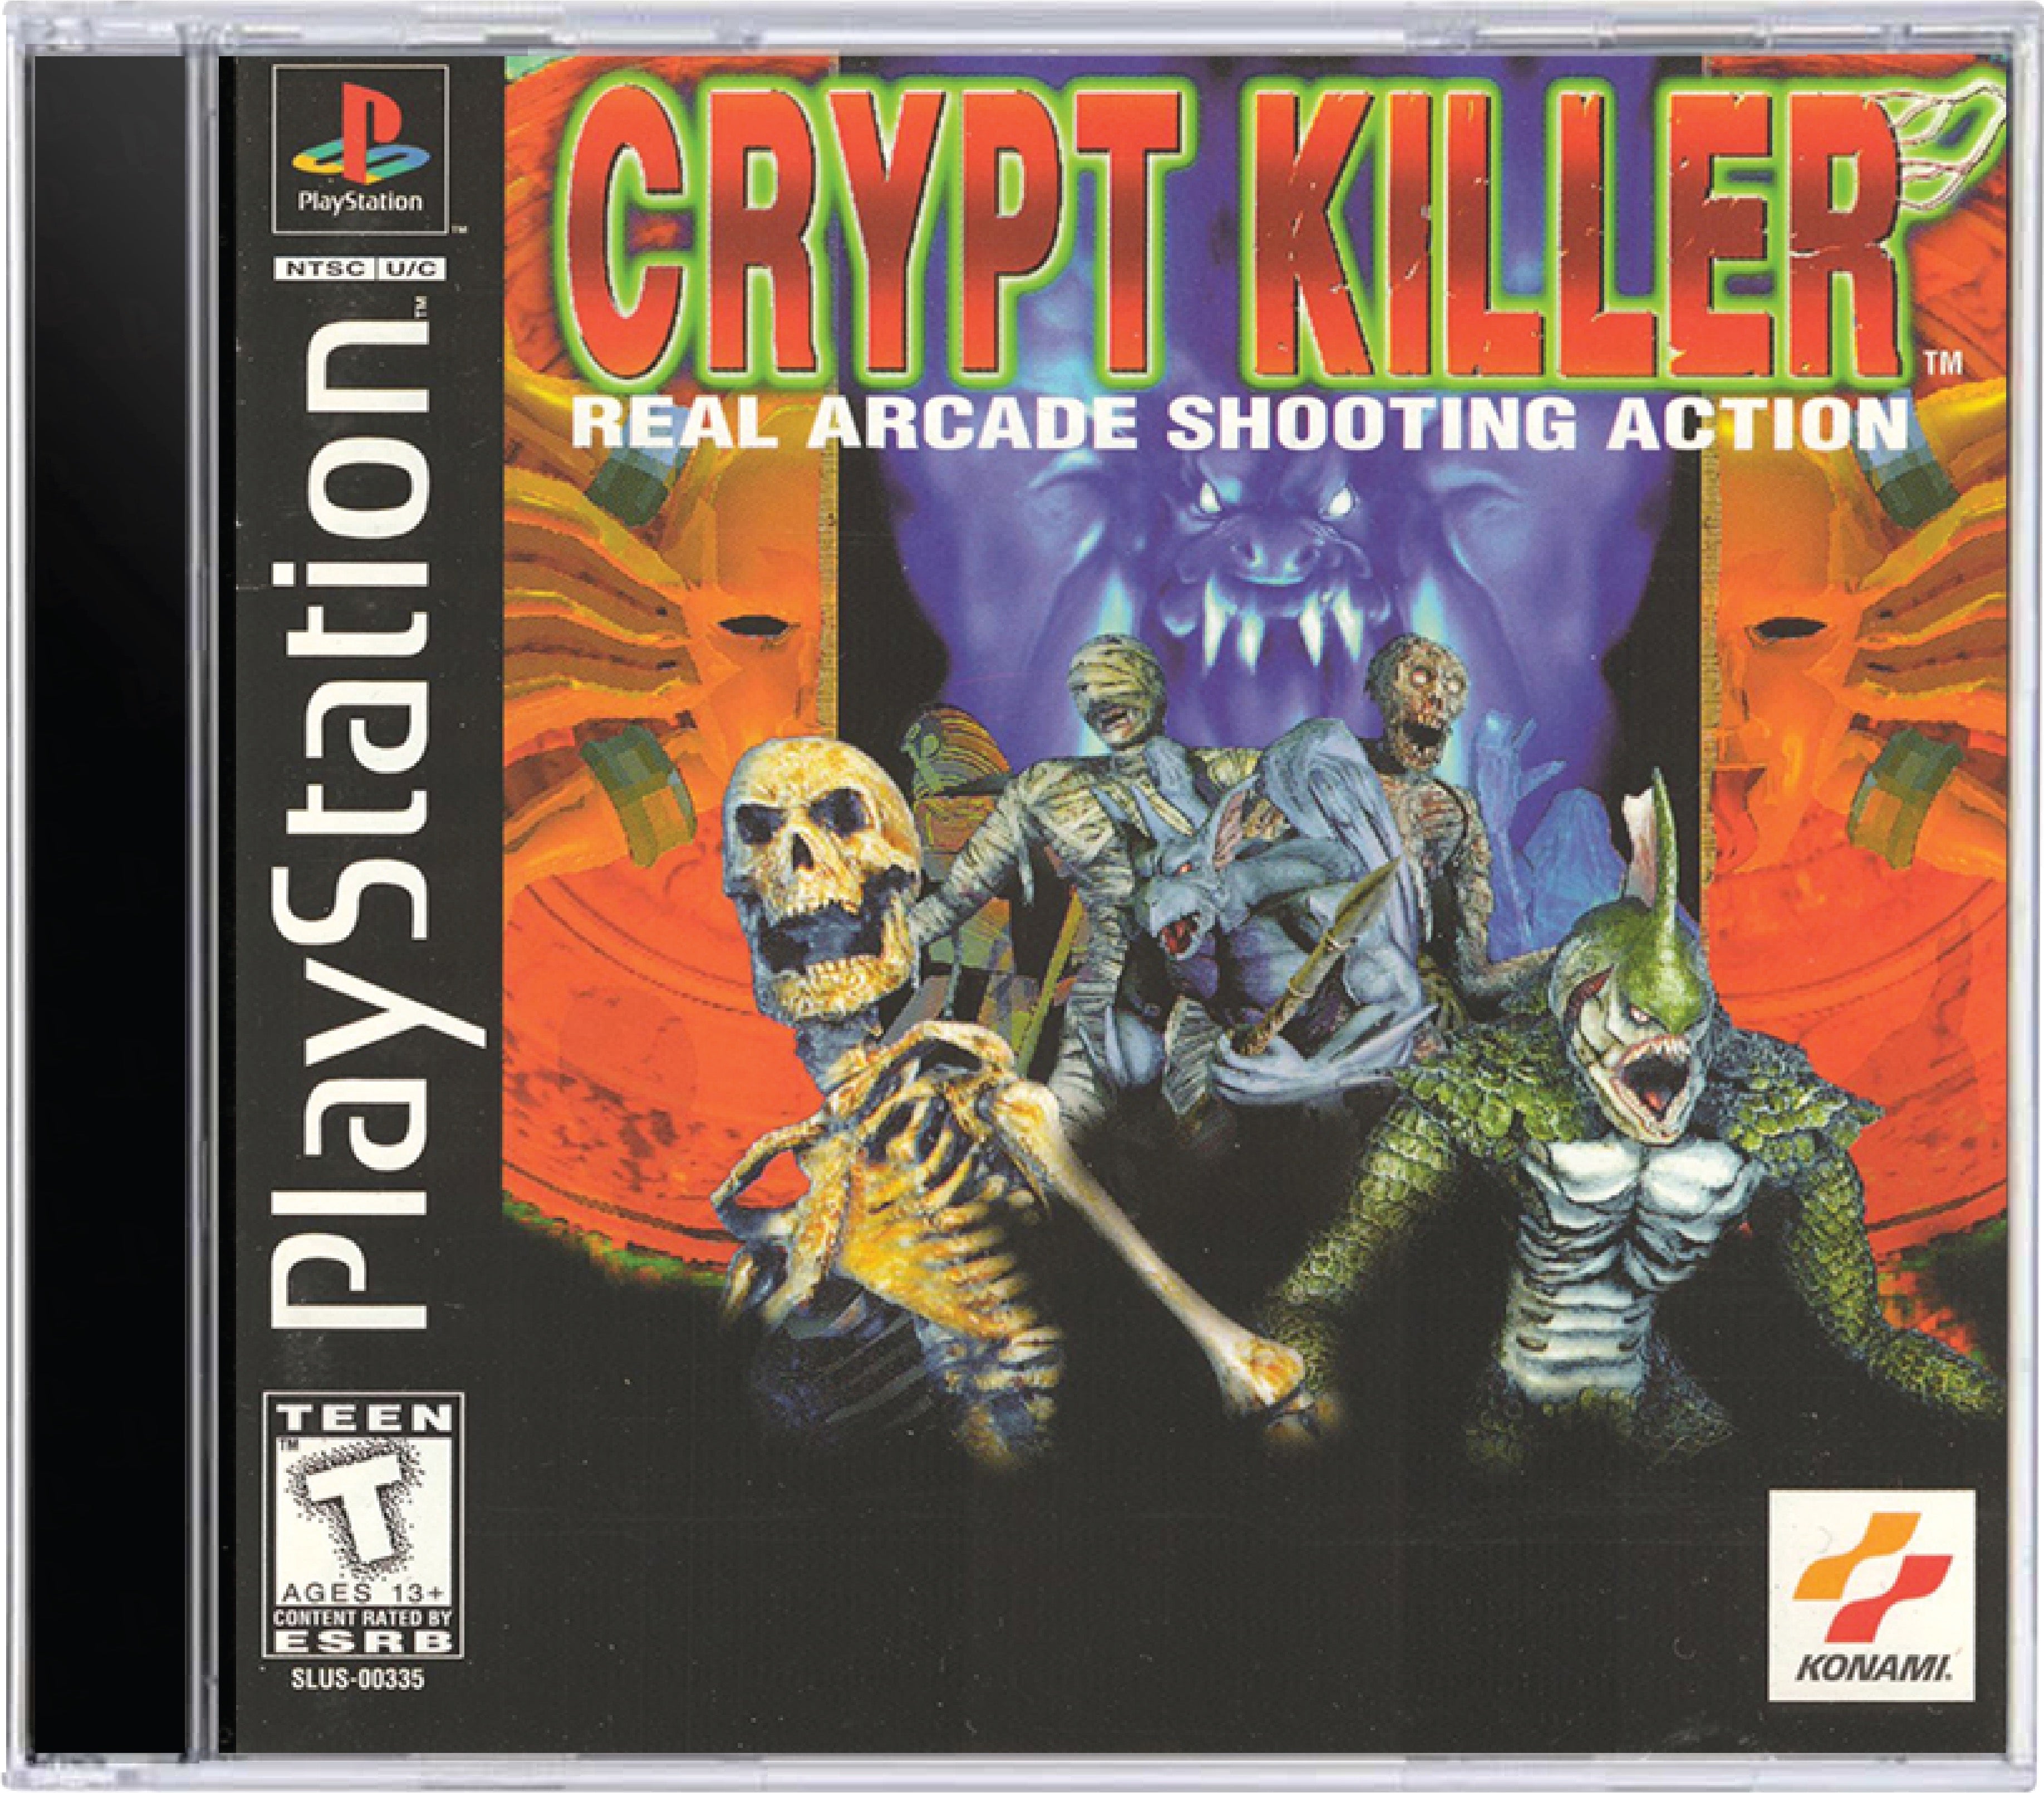 Crypt Killer Cover Art and Product Photo